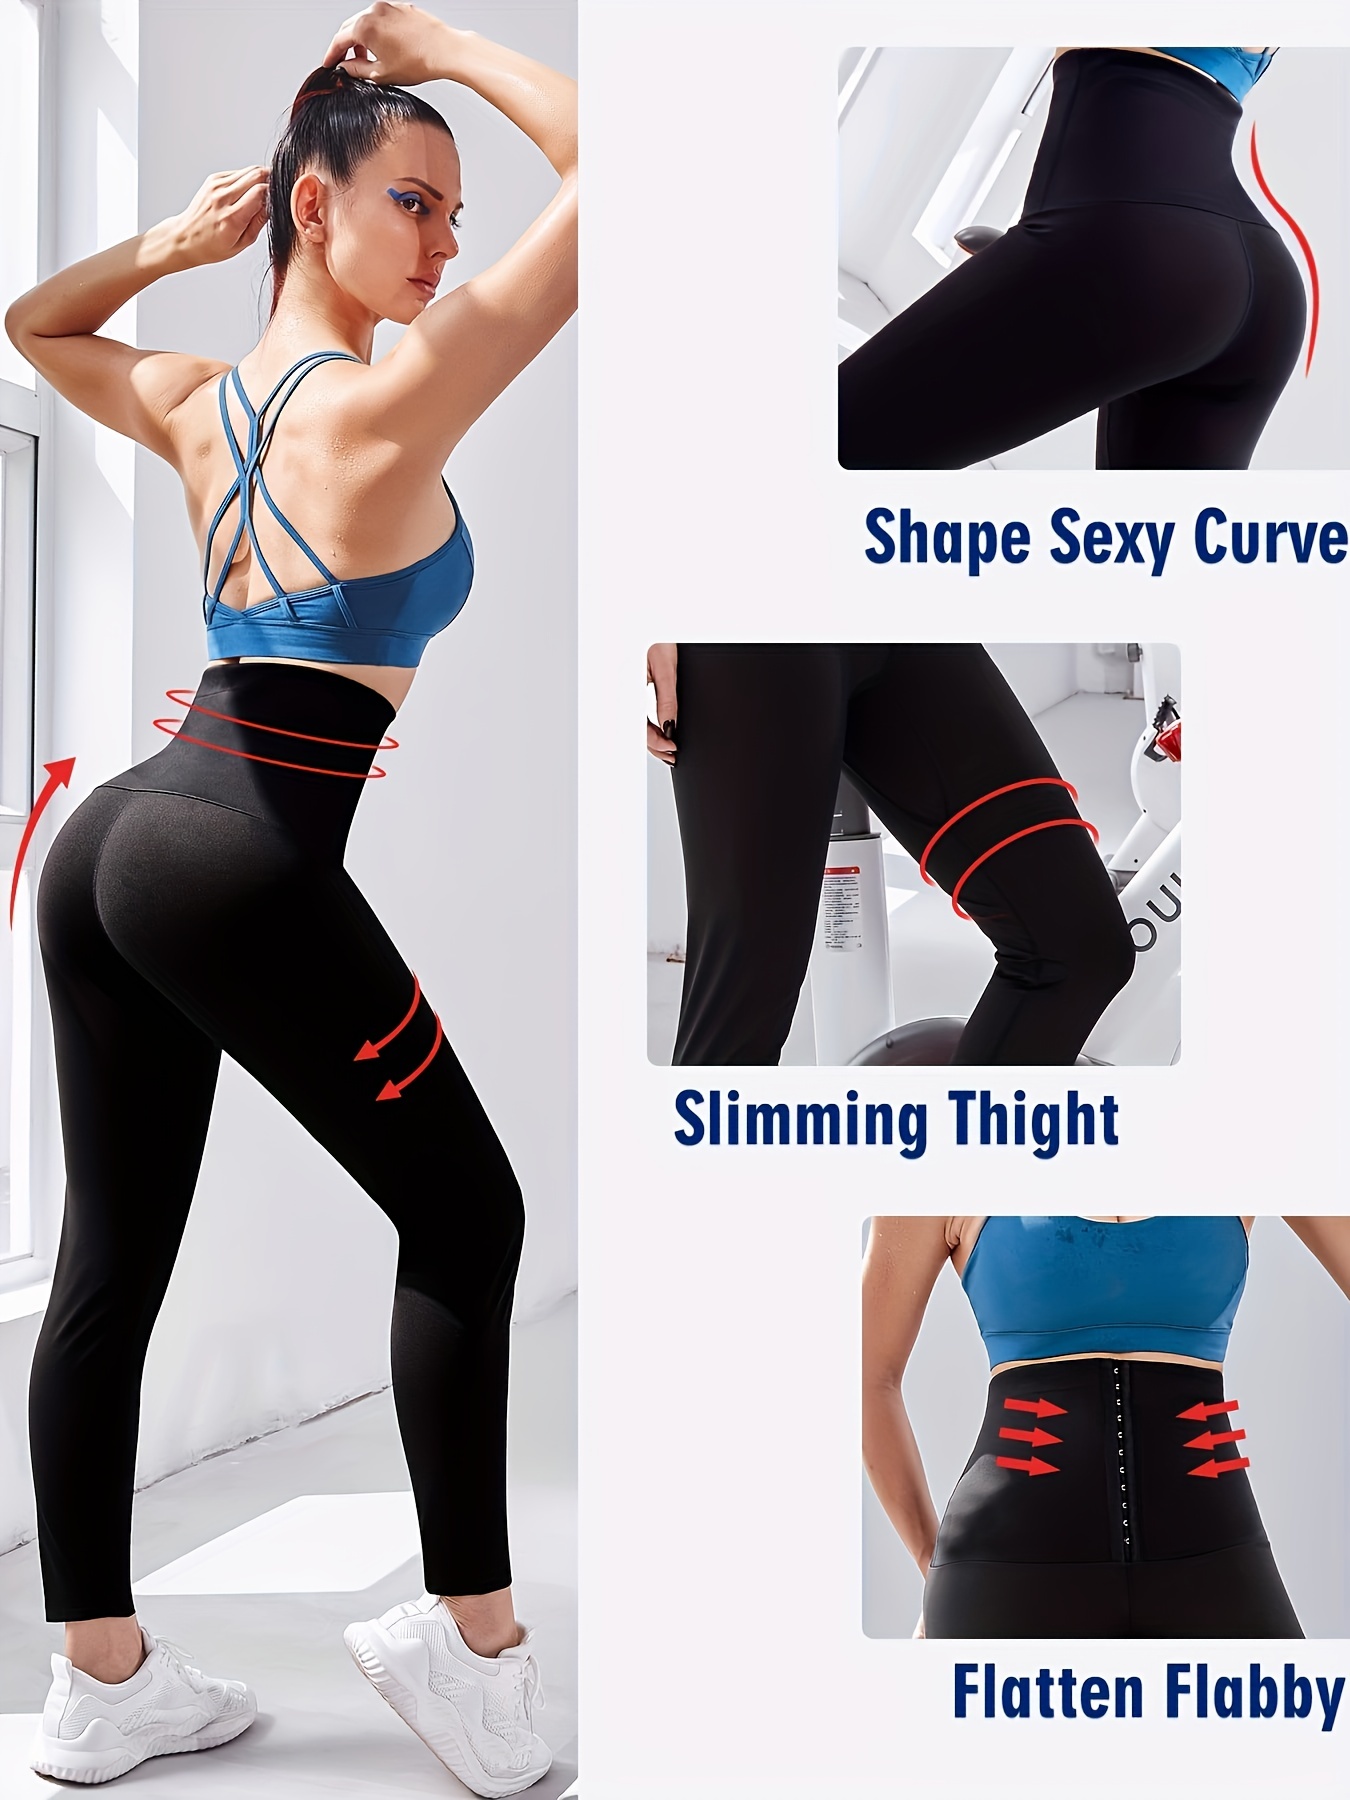  Women Thermo Body Pants Coating Weight Loss Waist Trainer Fat  Burning Sweat Sauna Capris Leggings Shapers (Color : Black, Size : Asian  Size L XL)